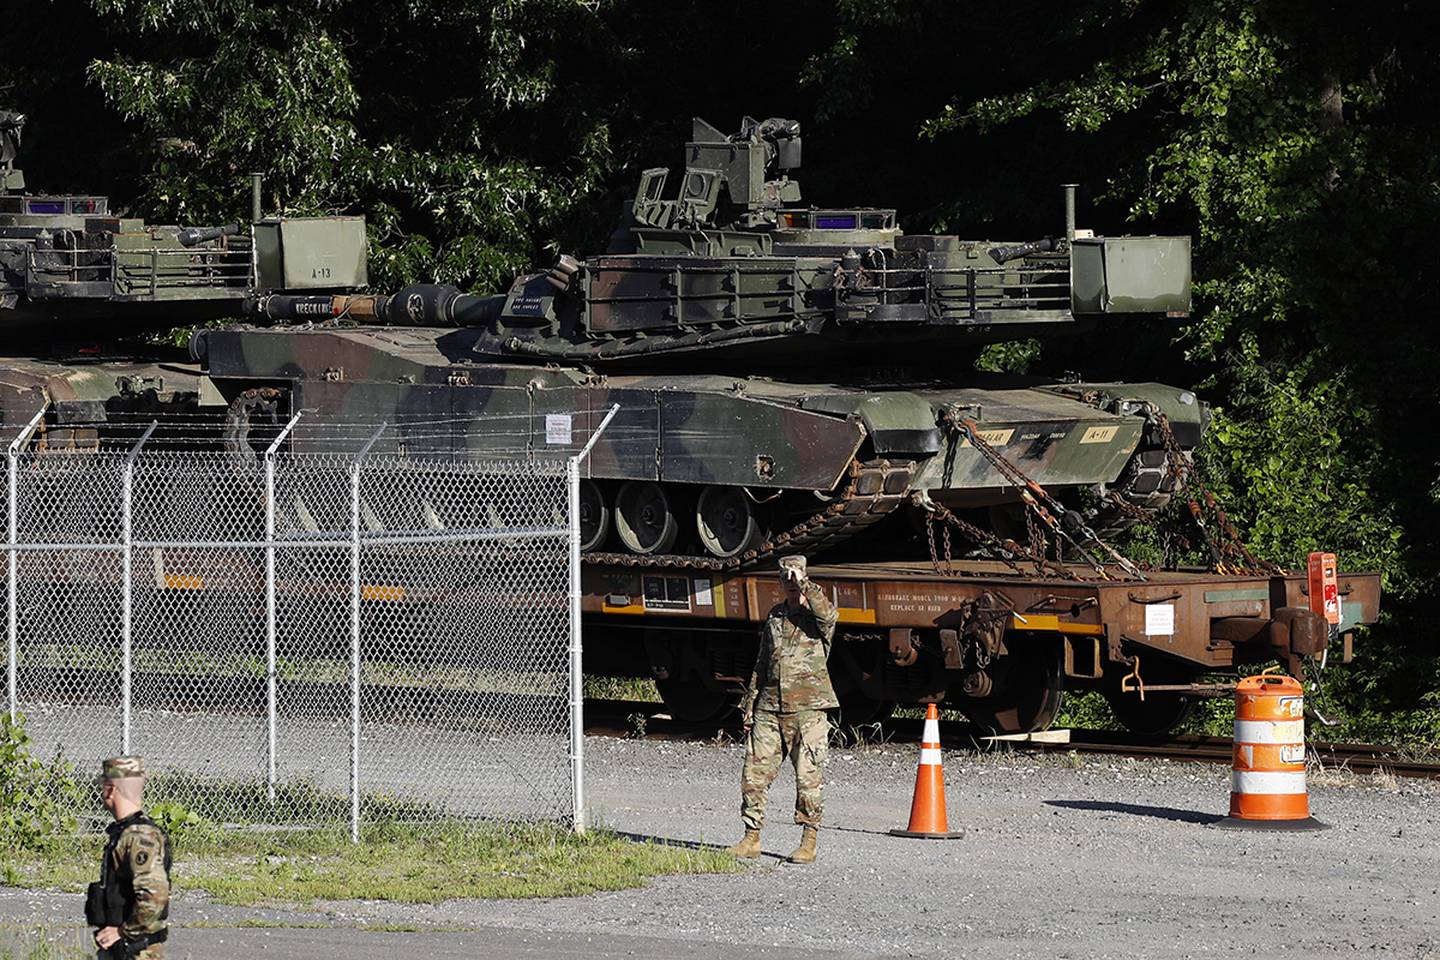 Military police walk near Abrams tanks on a flat car in a rail yard, Monday, July 1, 2019, in Washington, ahead of a Fourth of July celebration that President Donald Trump says will include military hardware.